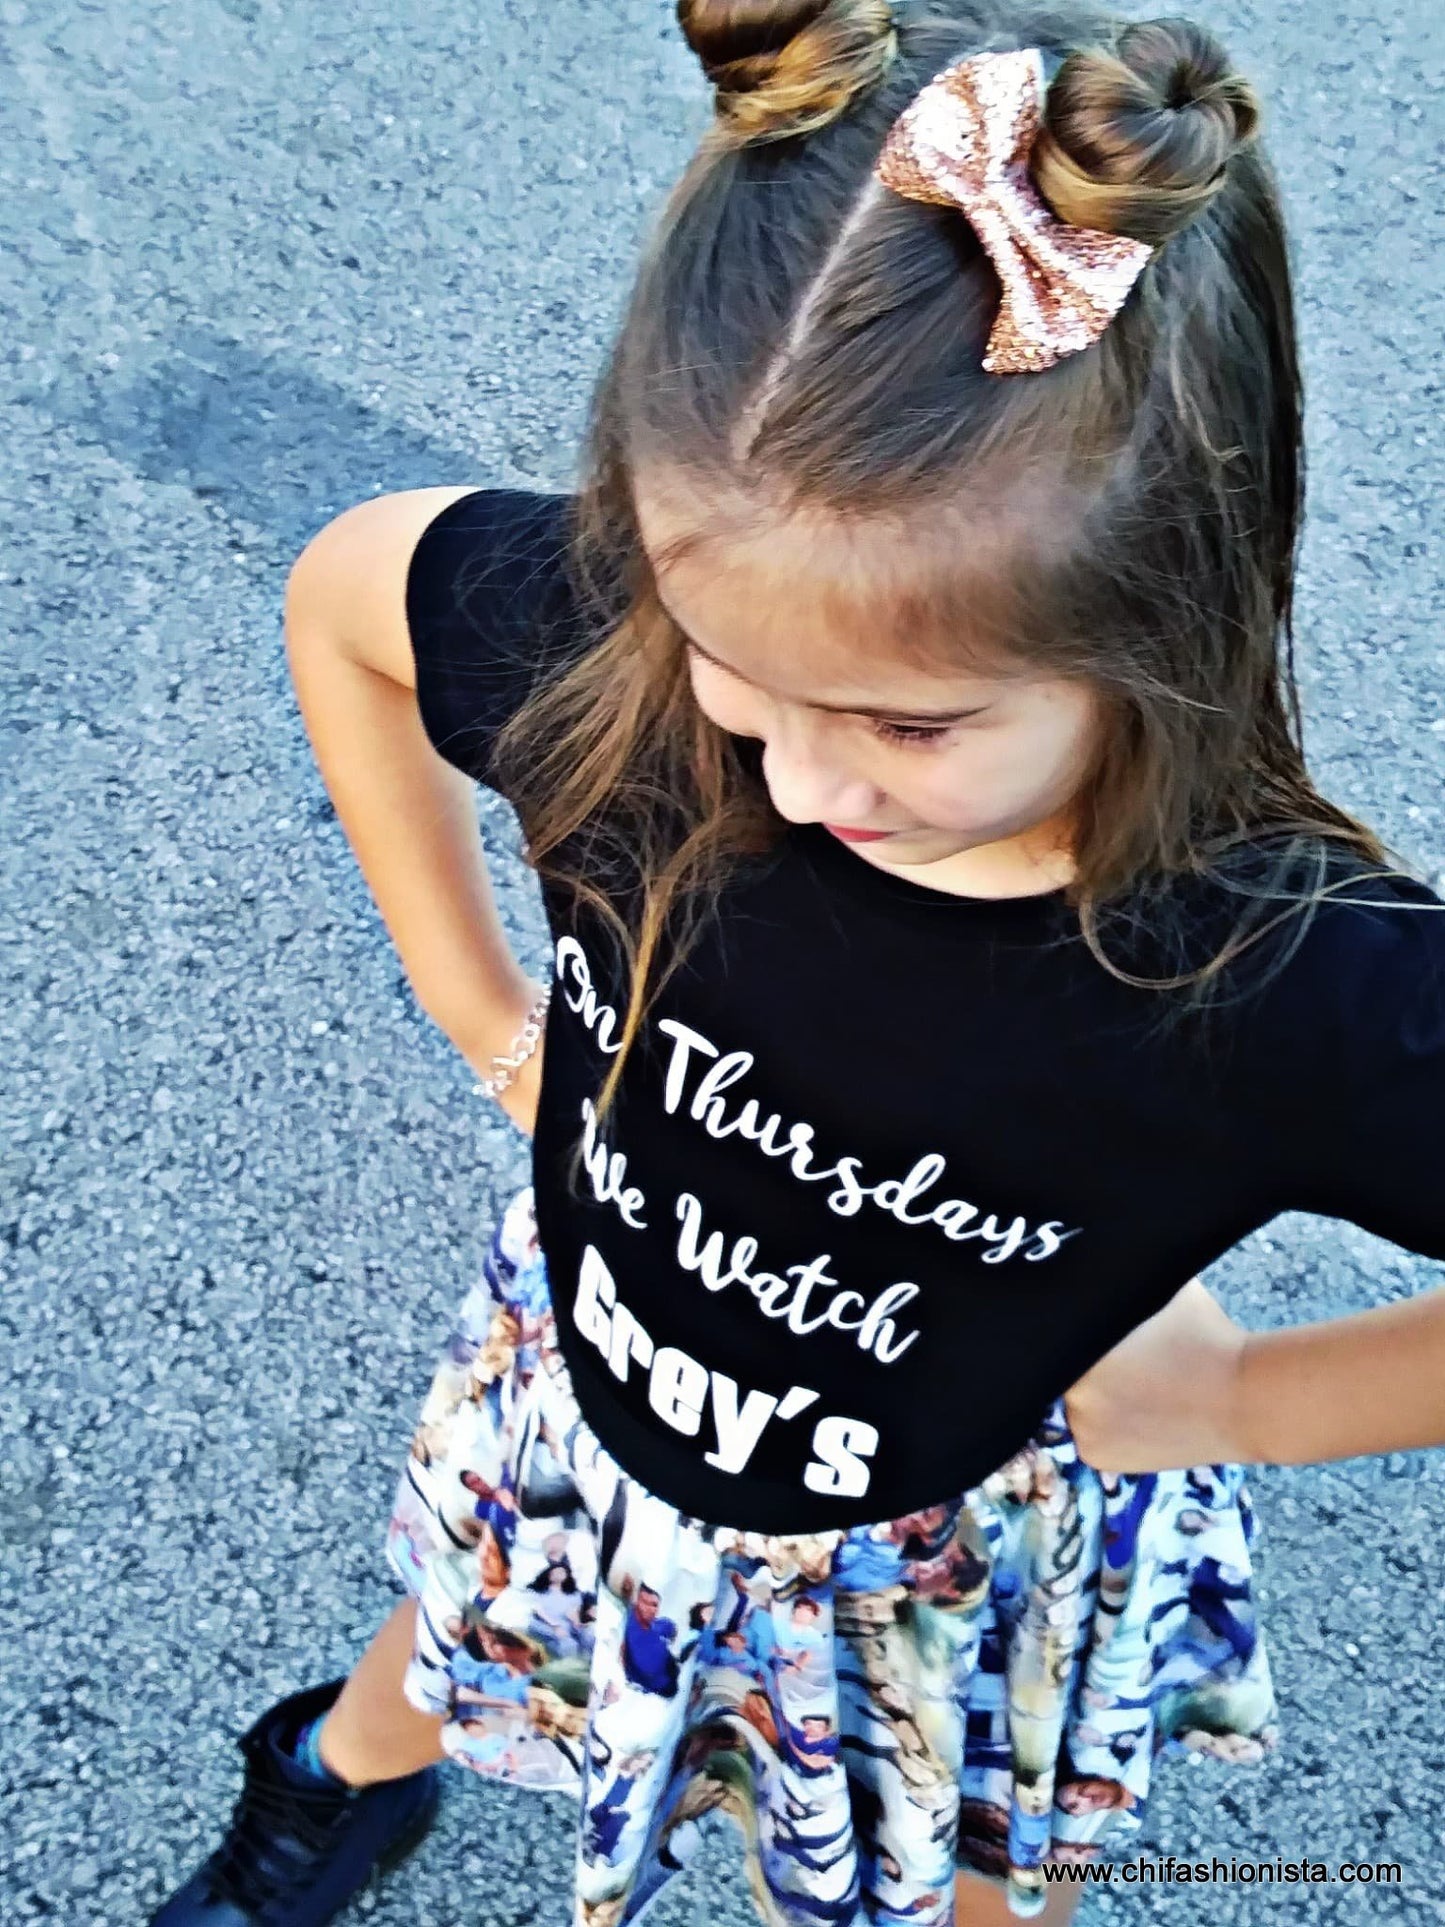 Handcrafted Children's Clothing, Clothing for Children and Parents, On Thursday's We Watch Grey's Shirt, chi-fashionista